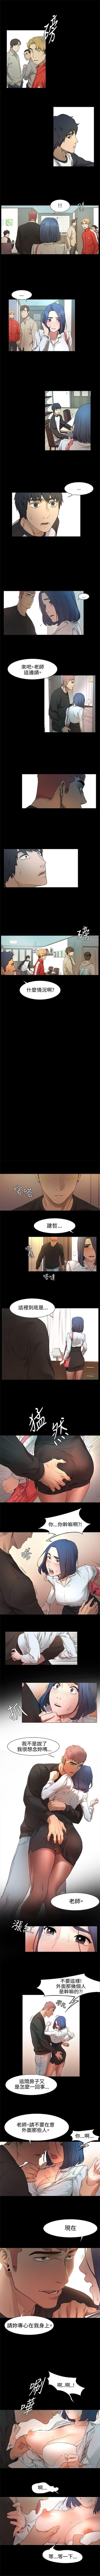 Bailando 衝突 1-106 官方中文（連載中） Ass To Mouth - Page 11